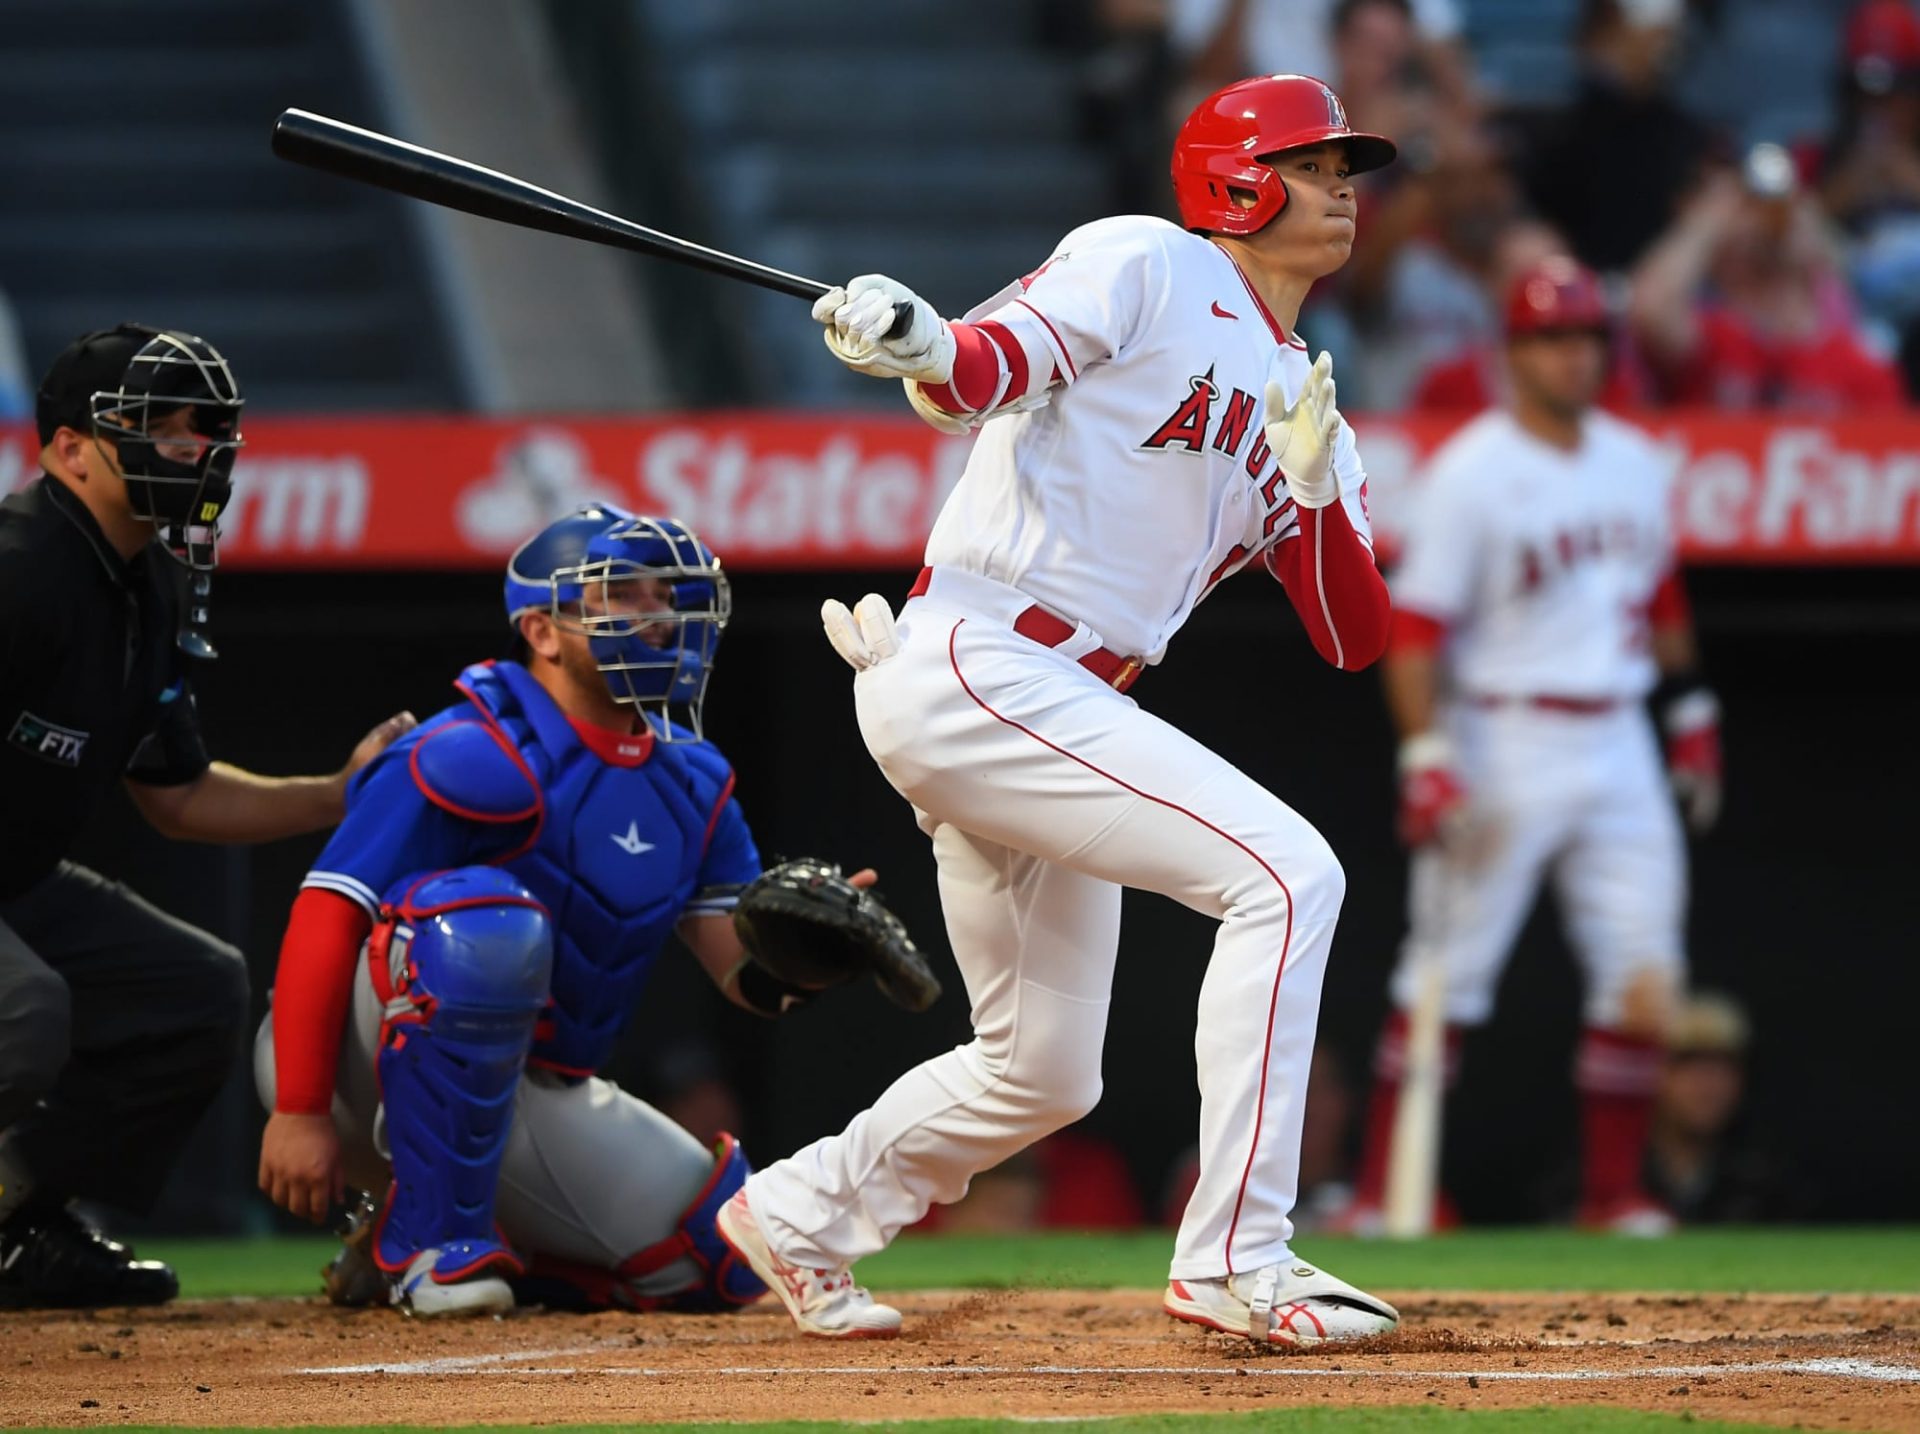 Shohei Ohtani provides to house lunge complete with game-tying shot (Video)